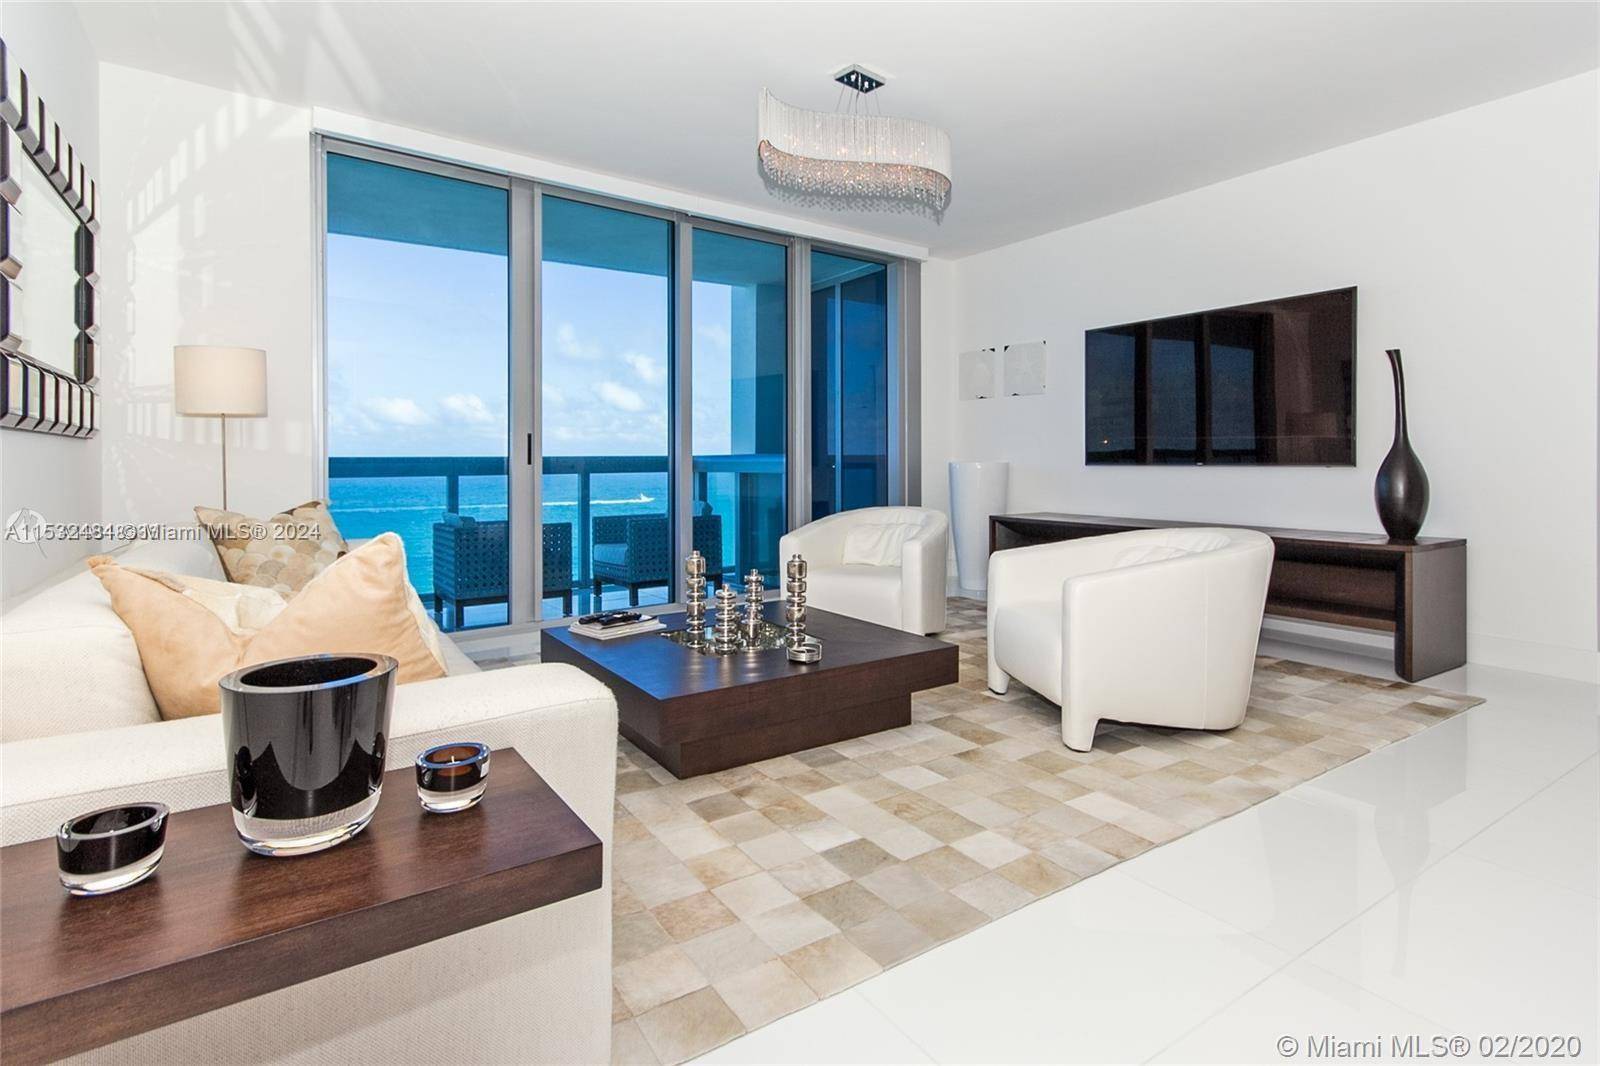 DIRECT OCEAN view split plan elegantly decorated by Saccaro in prestigious North Tower, Carillon Miami Wellness Resort, a premier oceanfront property.